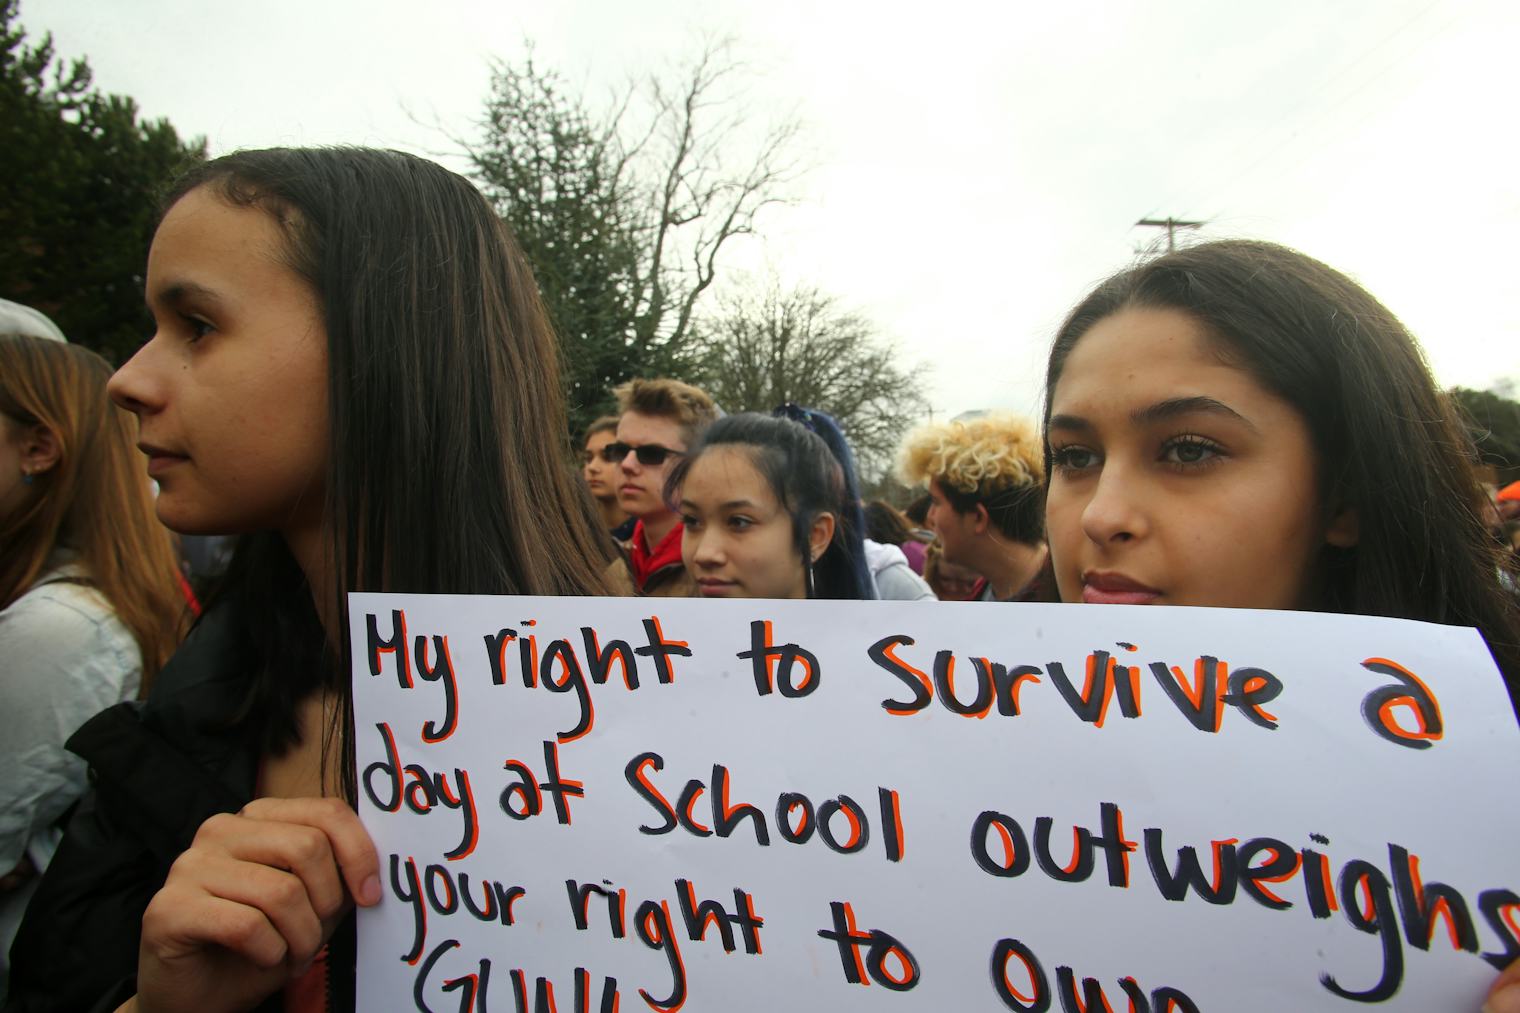 Why Is The National School Walkout On April 20? This Date Holds A Lot